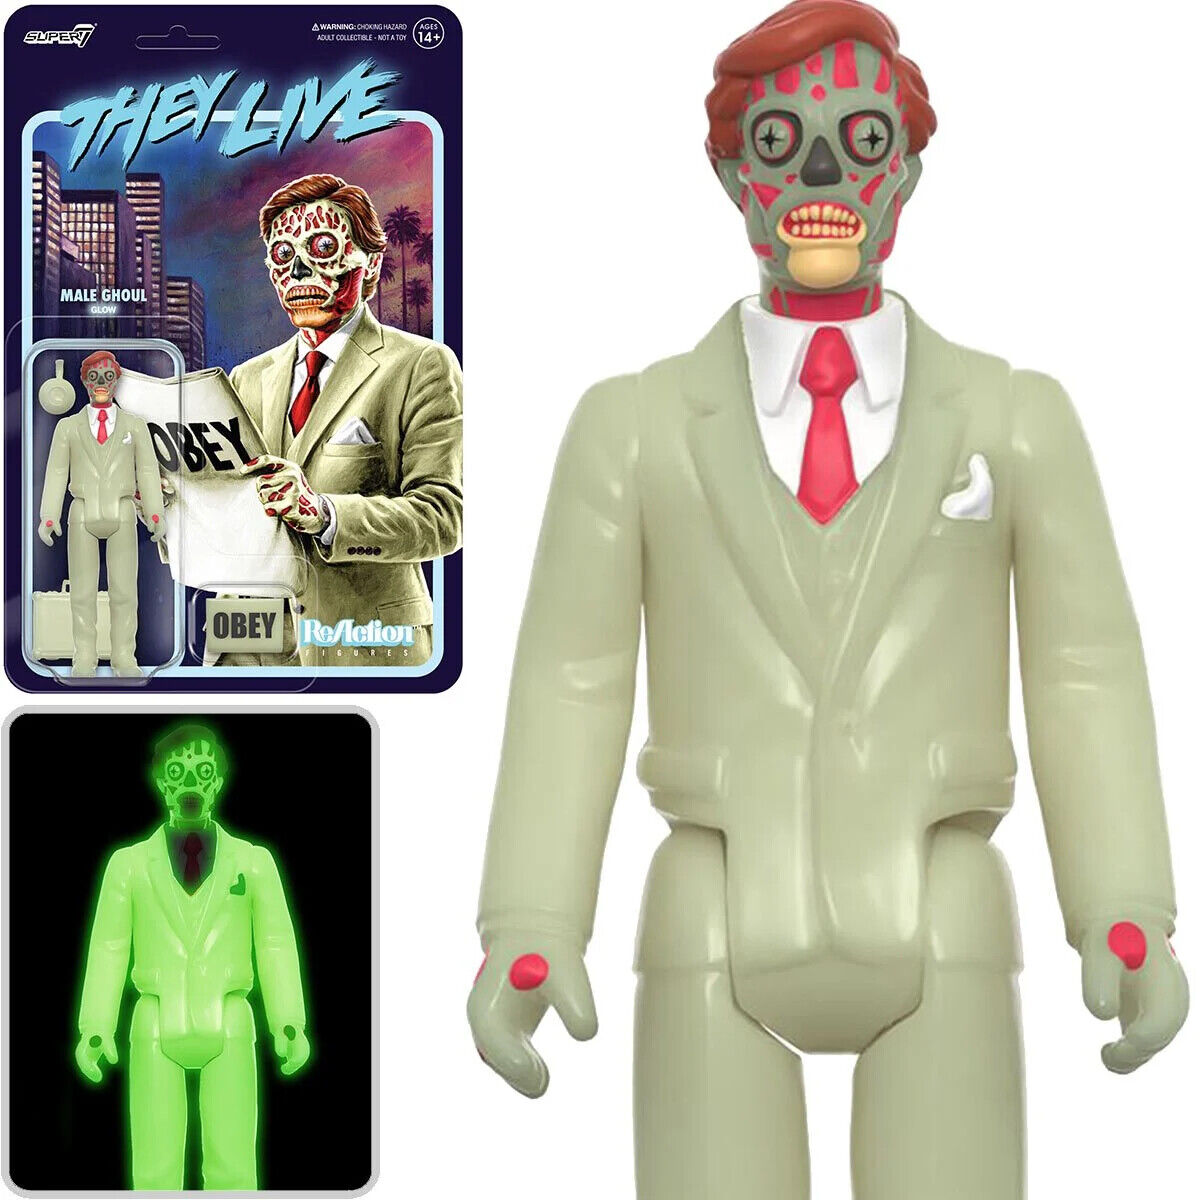 Male Ghoul They Live Glow Super7 Reaction Action Figure